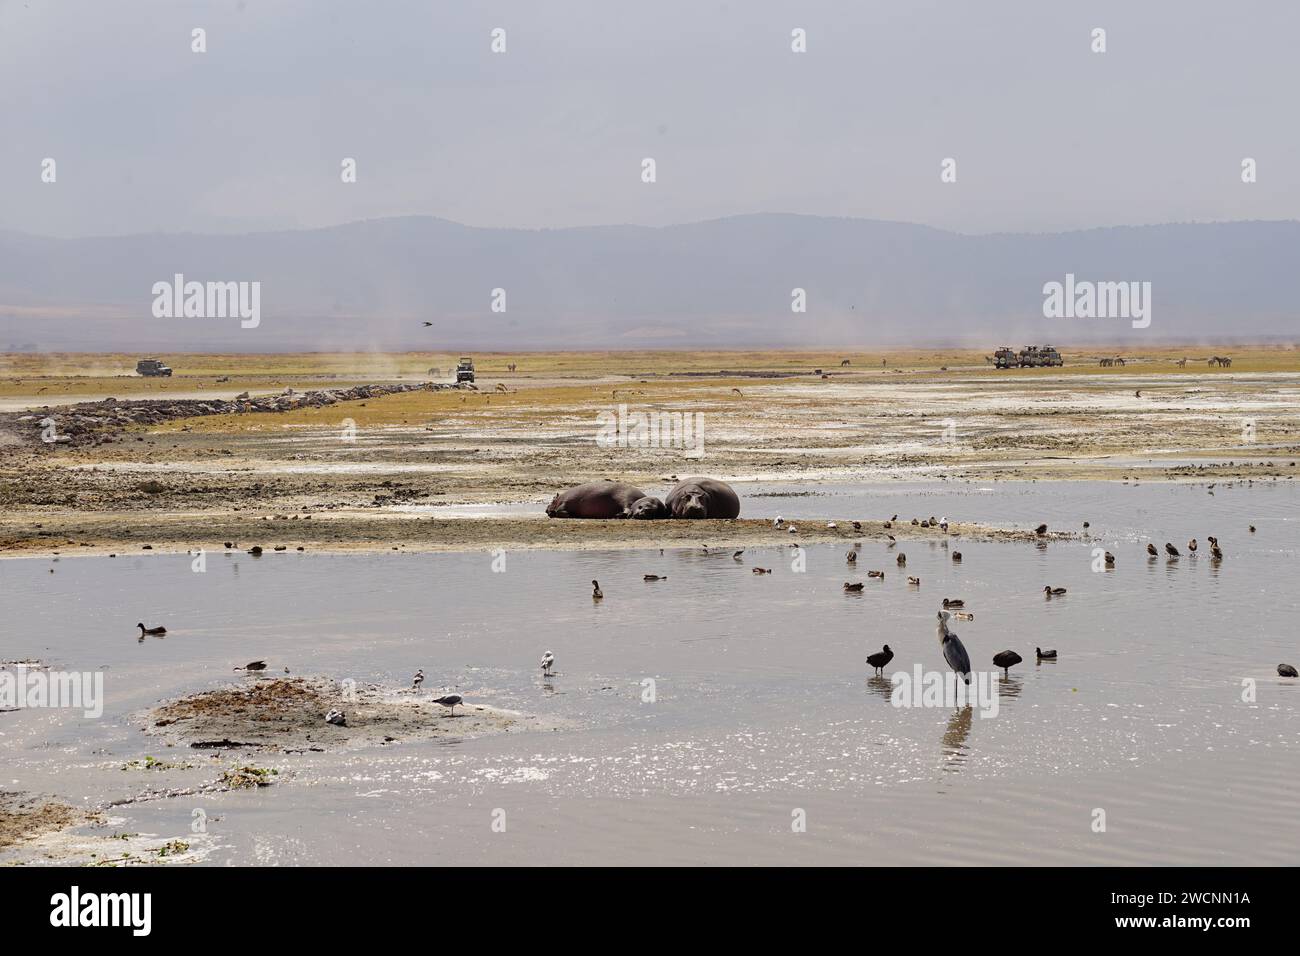 hippo family resting on shore, crane, coots, jeeps in far Stock Photo